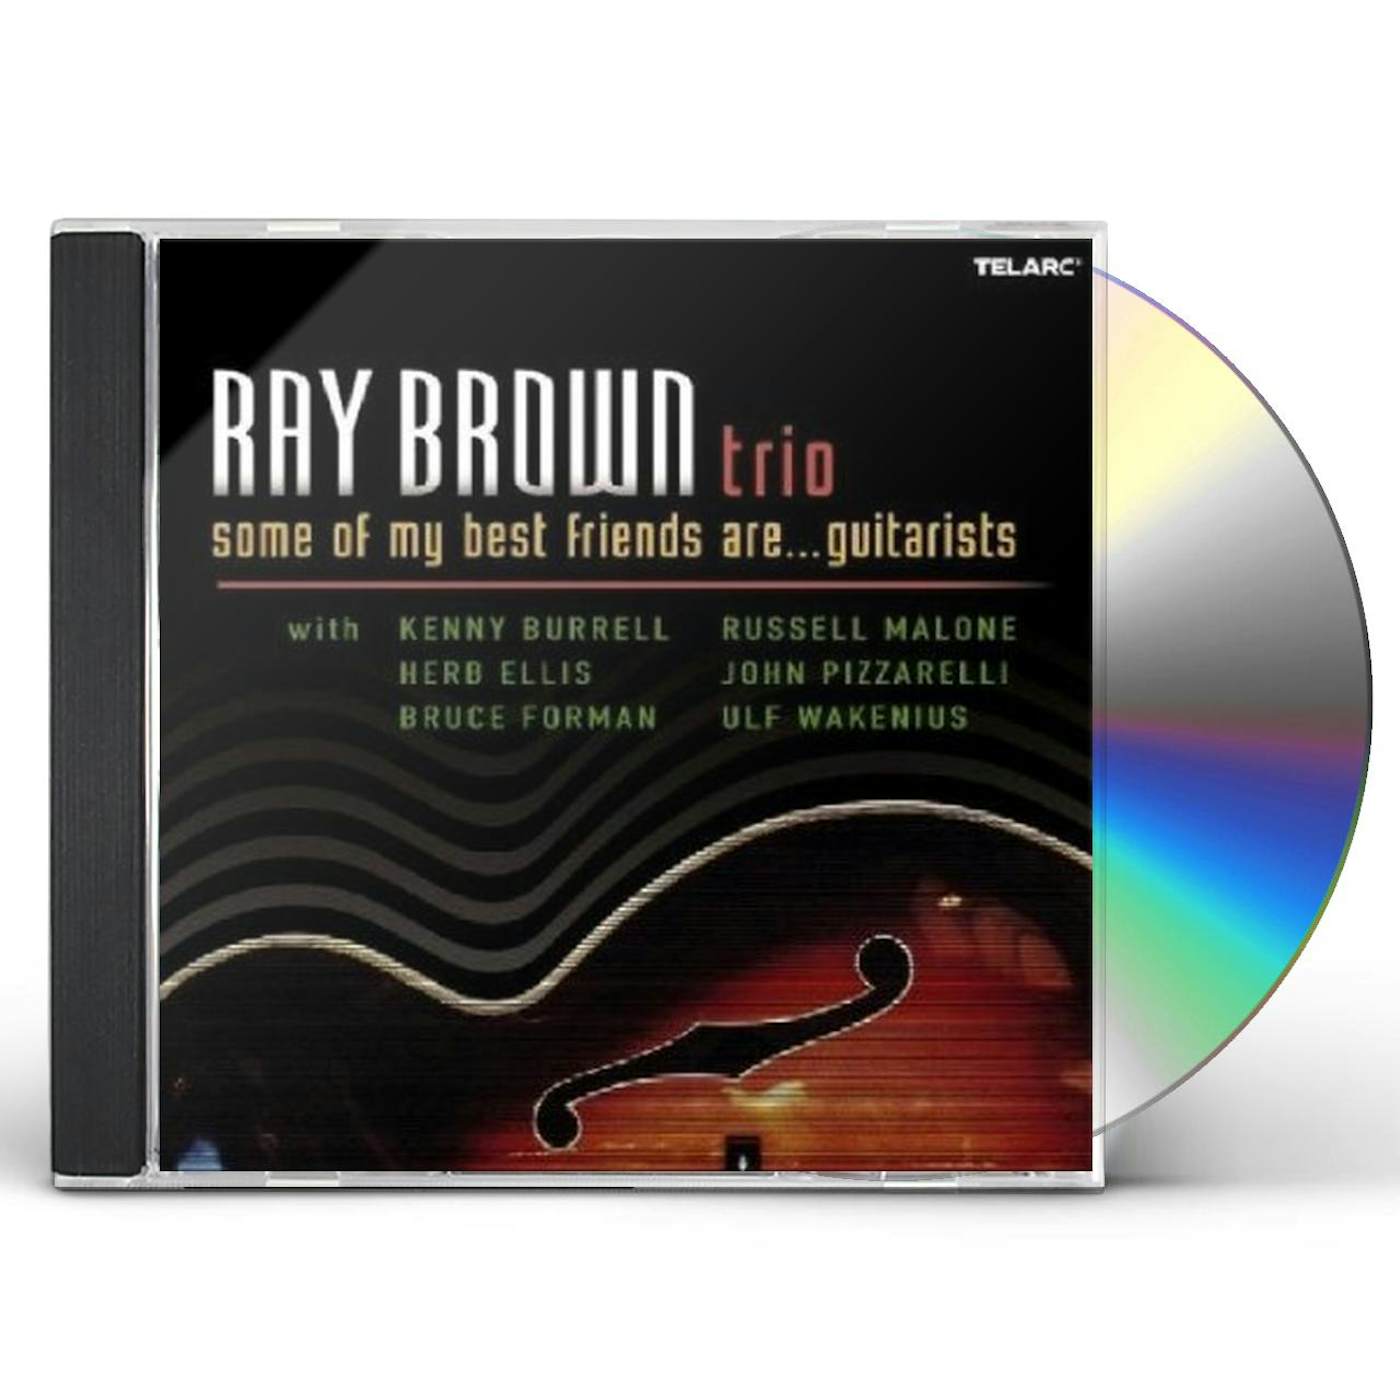 Ray Brown Trio SOME OF MY BEST FRIENDS ARE GUITARISTS CD